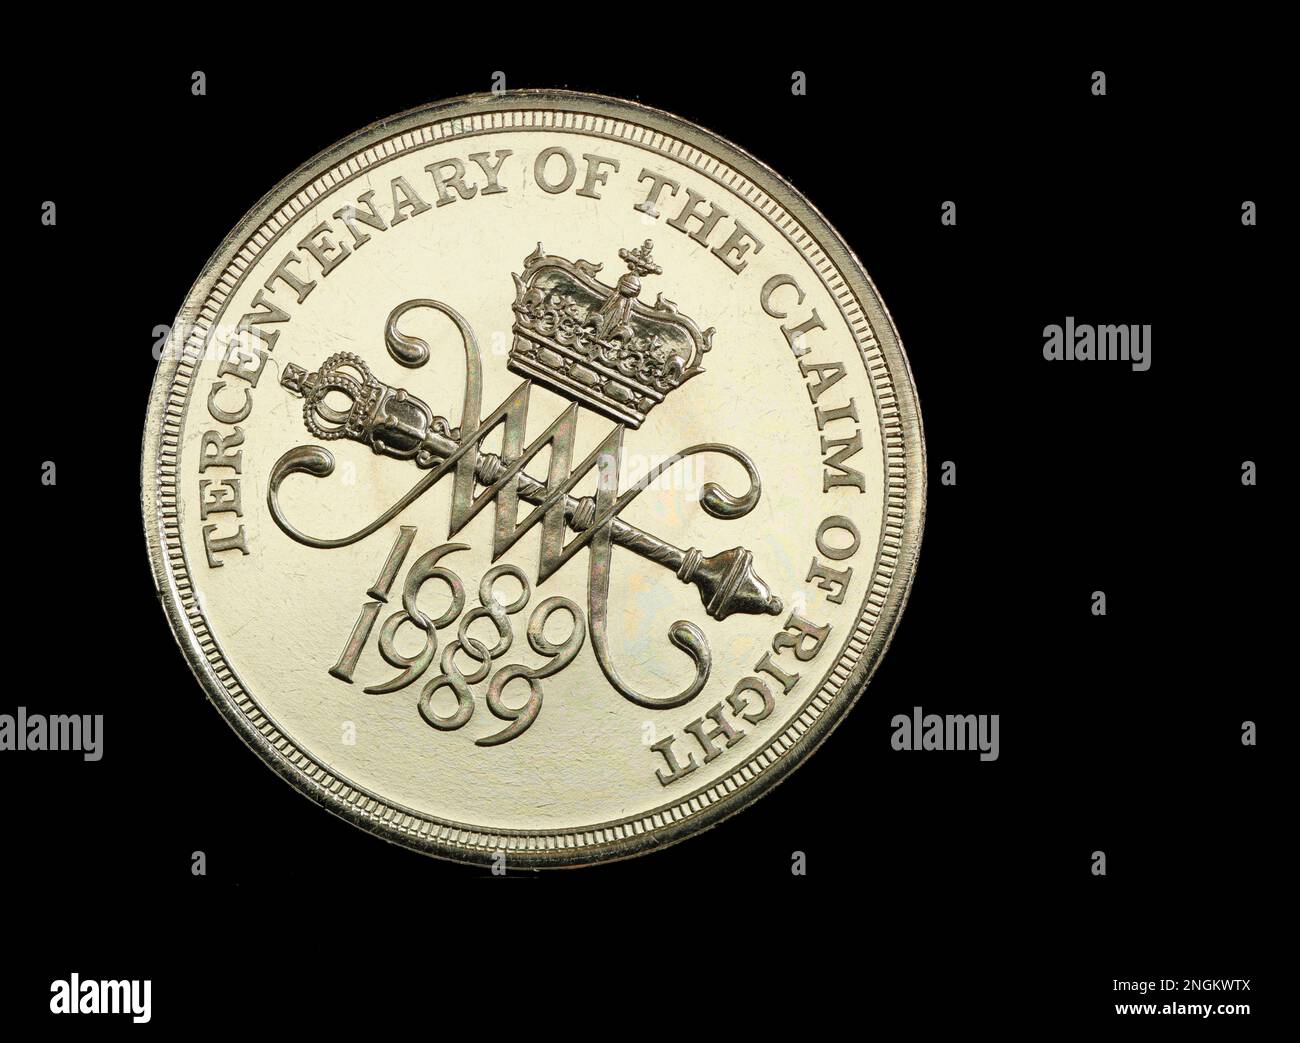 Reverse side of a 1989 £2 coin commemorating the Tercentenary of the Claim Of Right Stock Photo